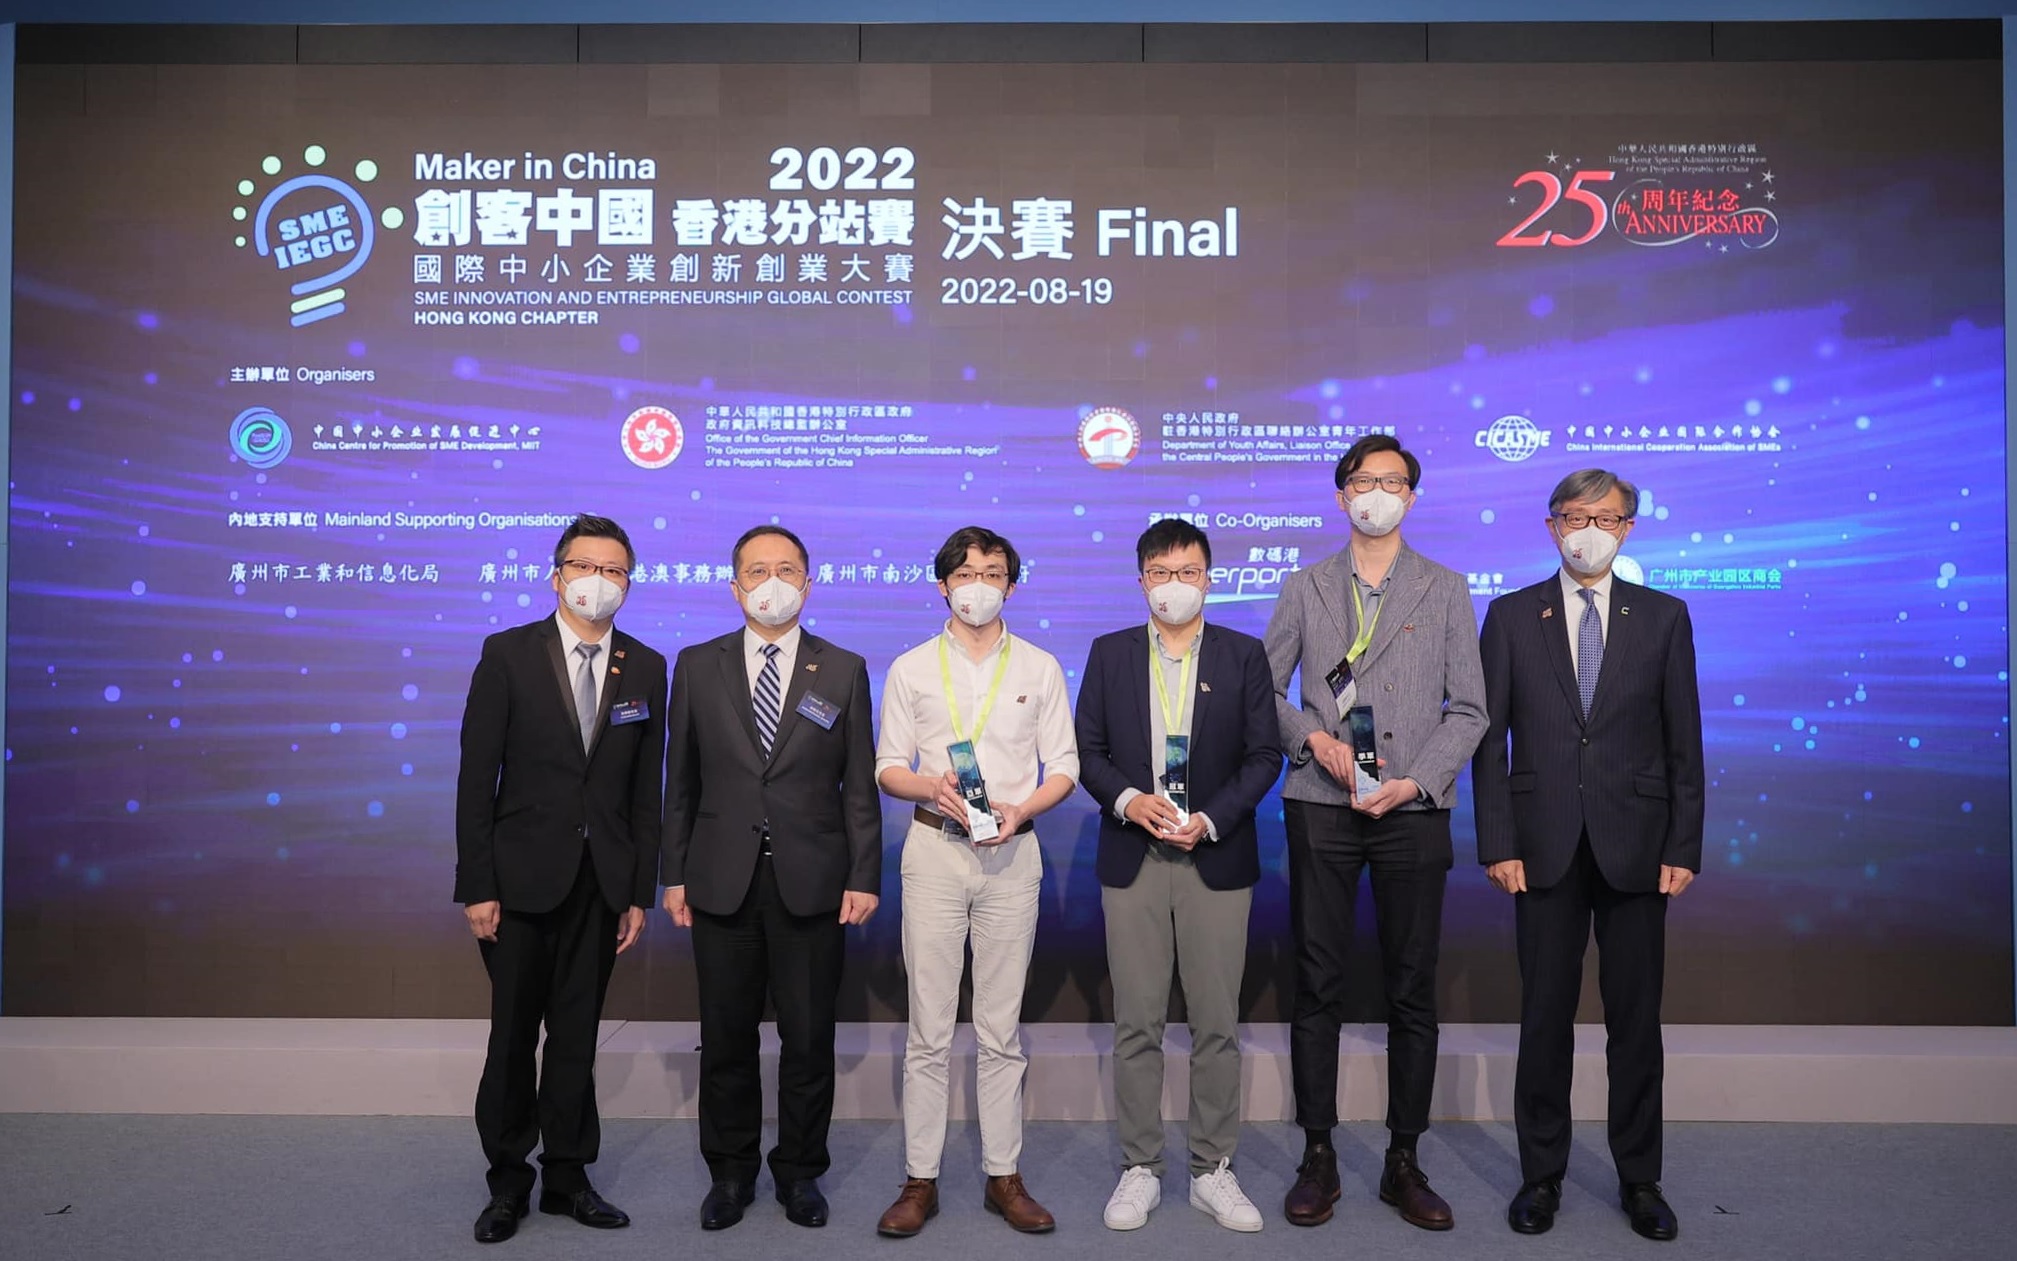 Group photo of the award presenters and the winners at the “Maker in China” SME Innovation and Entrepreneurship Global Contest 2022 – Hong Kong Chapter Final